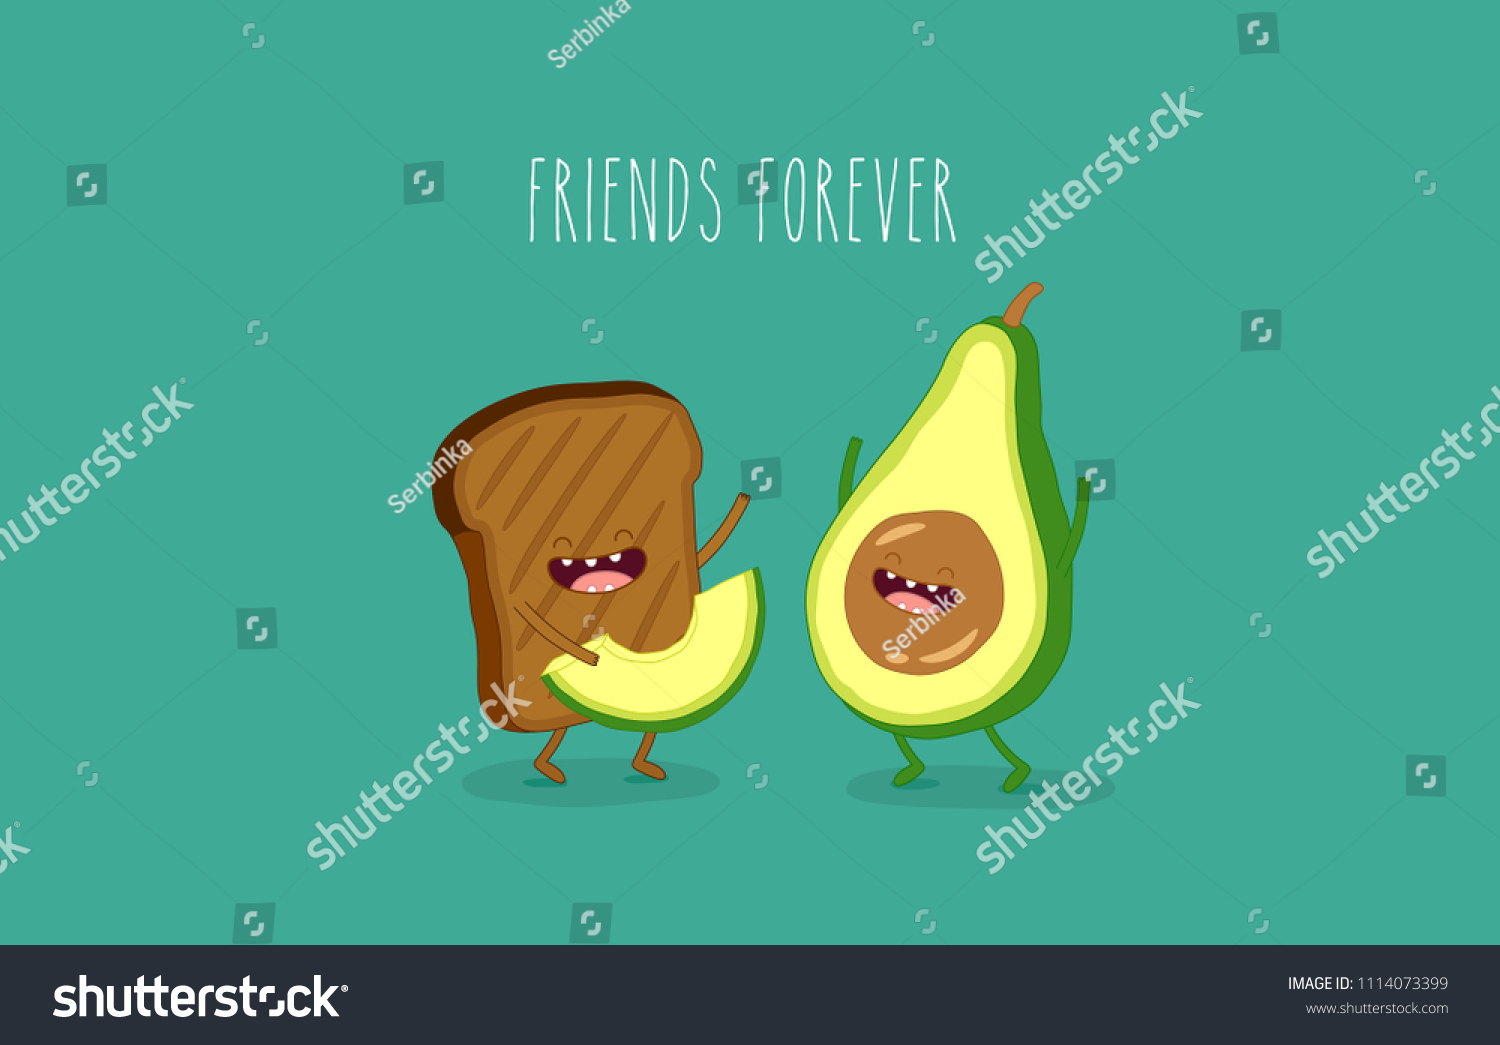 SVG of Avocado funny toast breakfast. Funny avocado image for cards, fridge magnets, stickers, posters, menu. svg